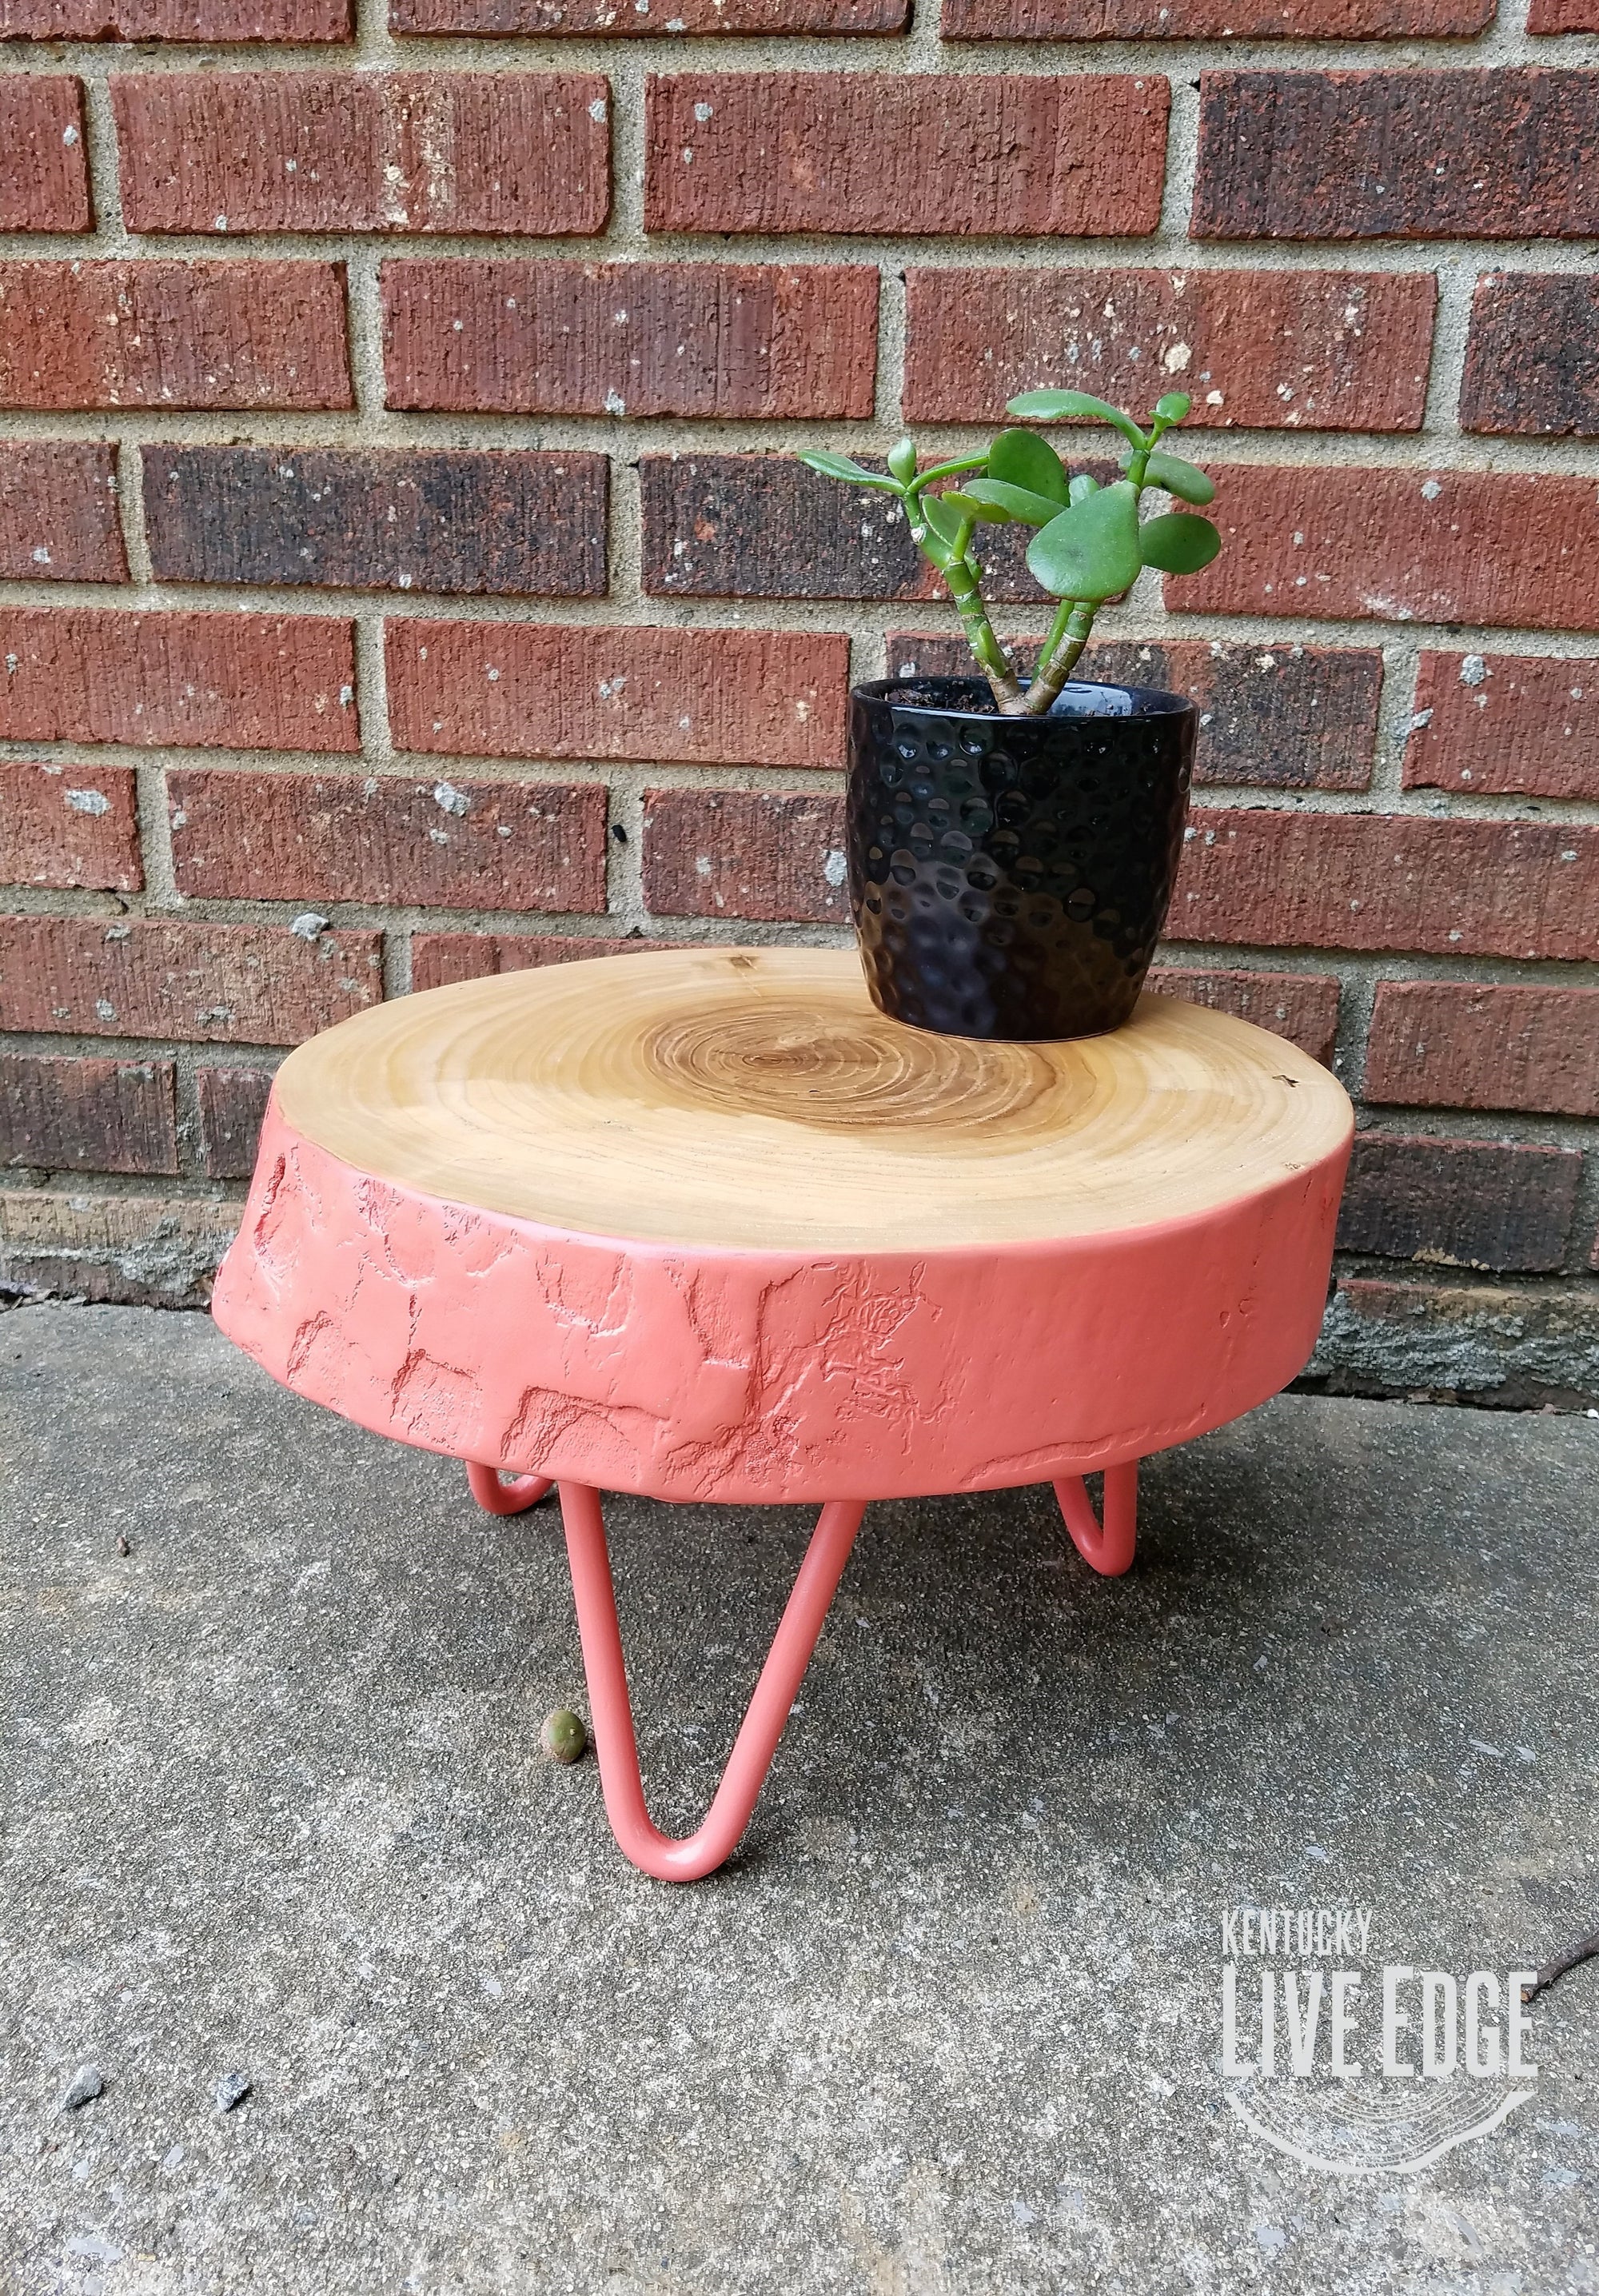 Plant Stand, Pink, Log, Side Table, Step Stool, Reclaimed Wood, Round, Organic, Natural Wood, Stool, Metal Legs, Live Edge, Mid Century